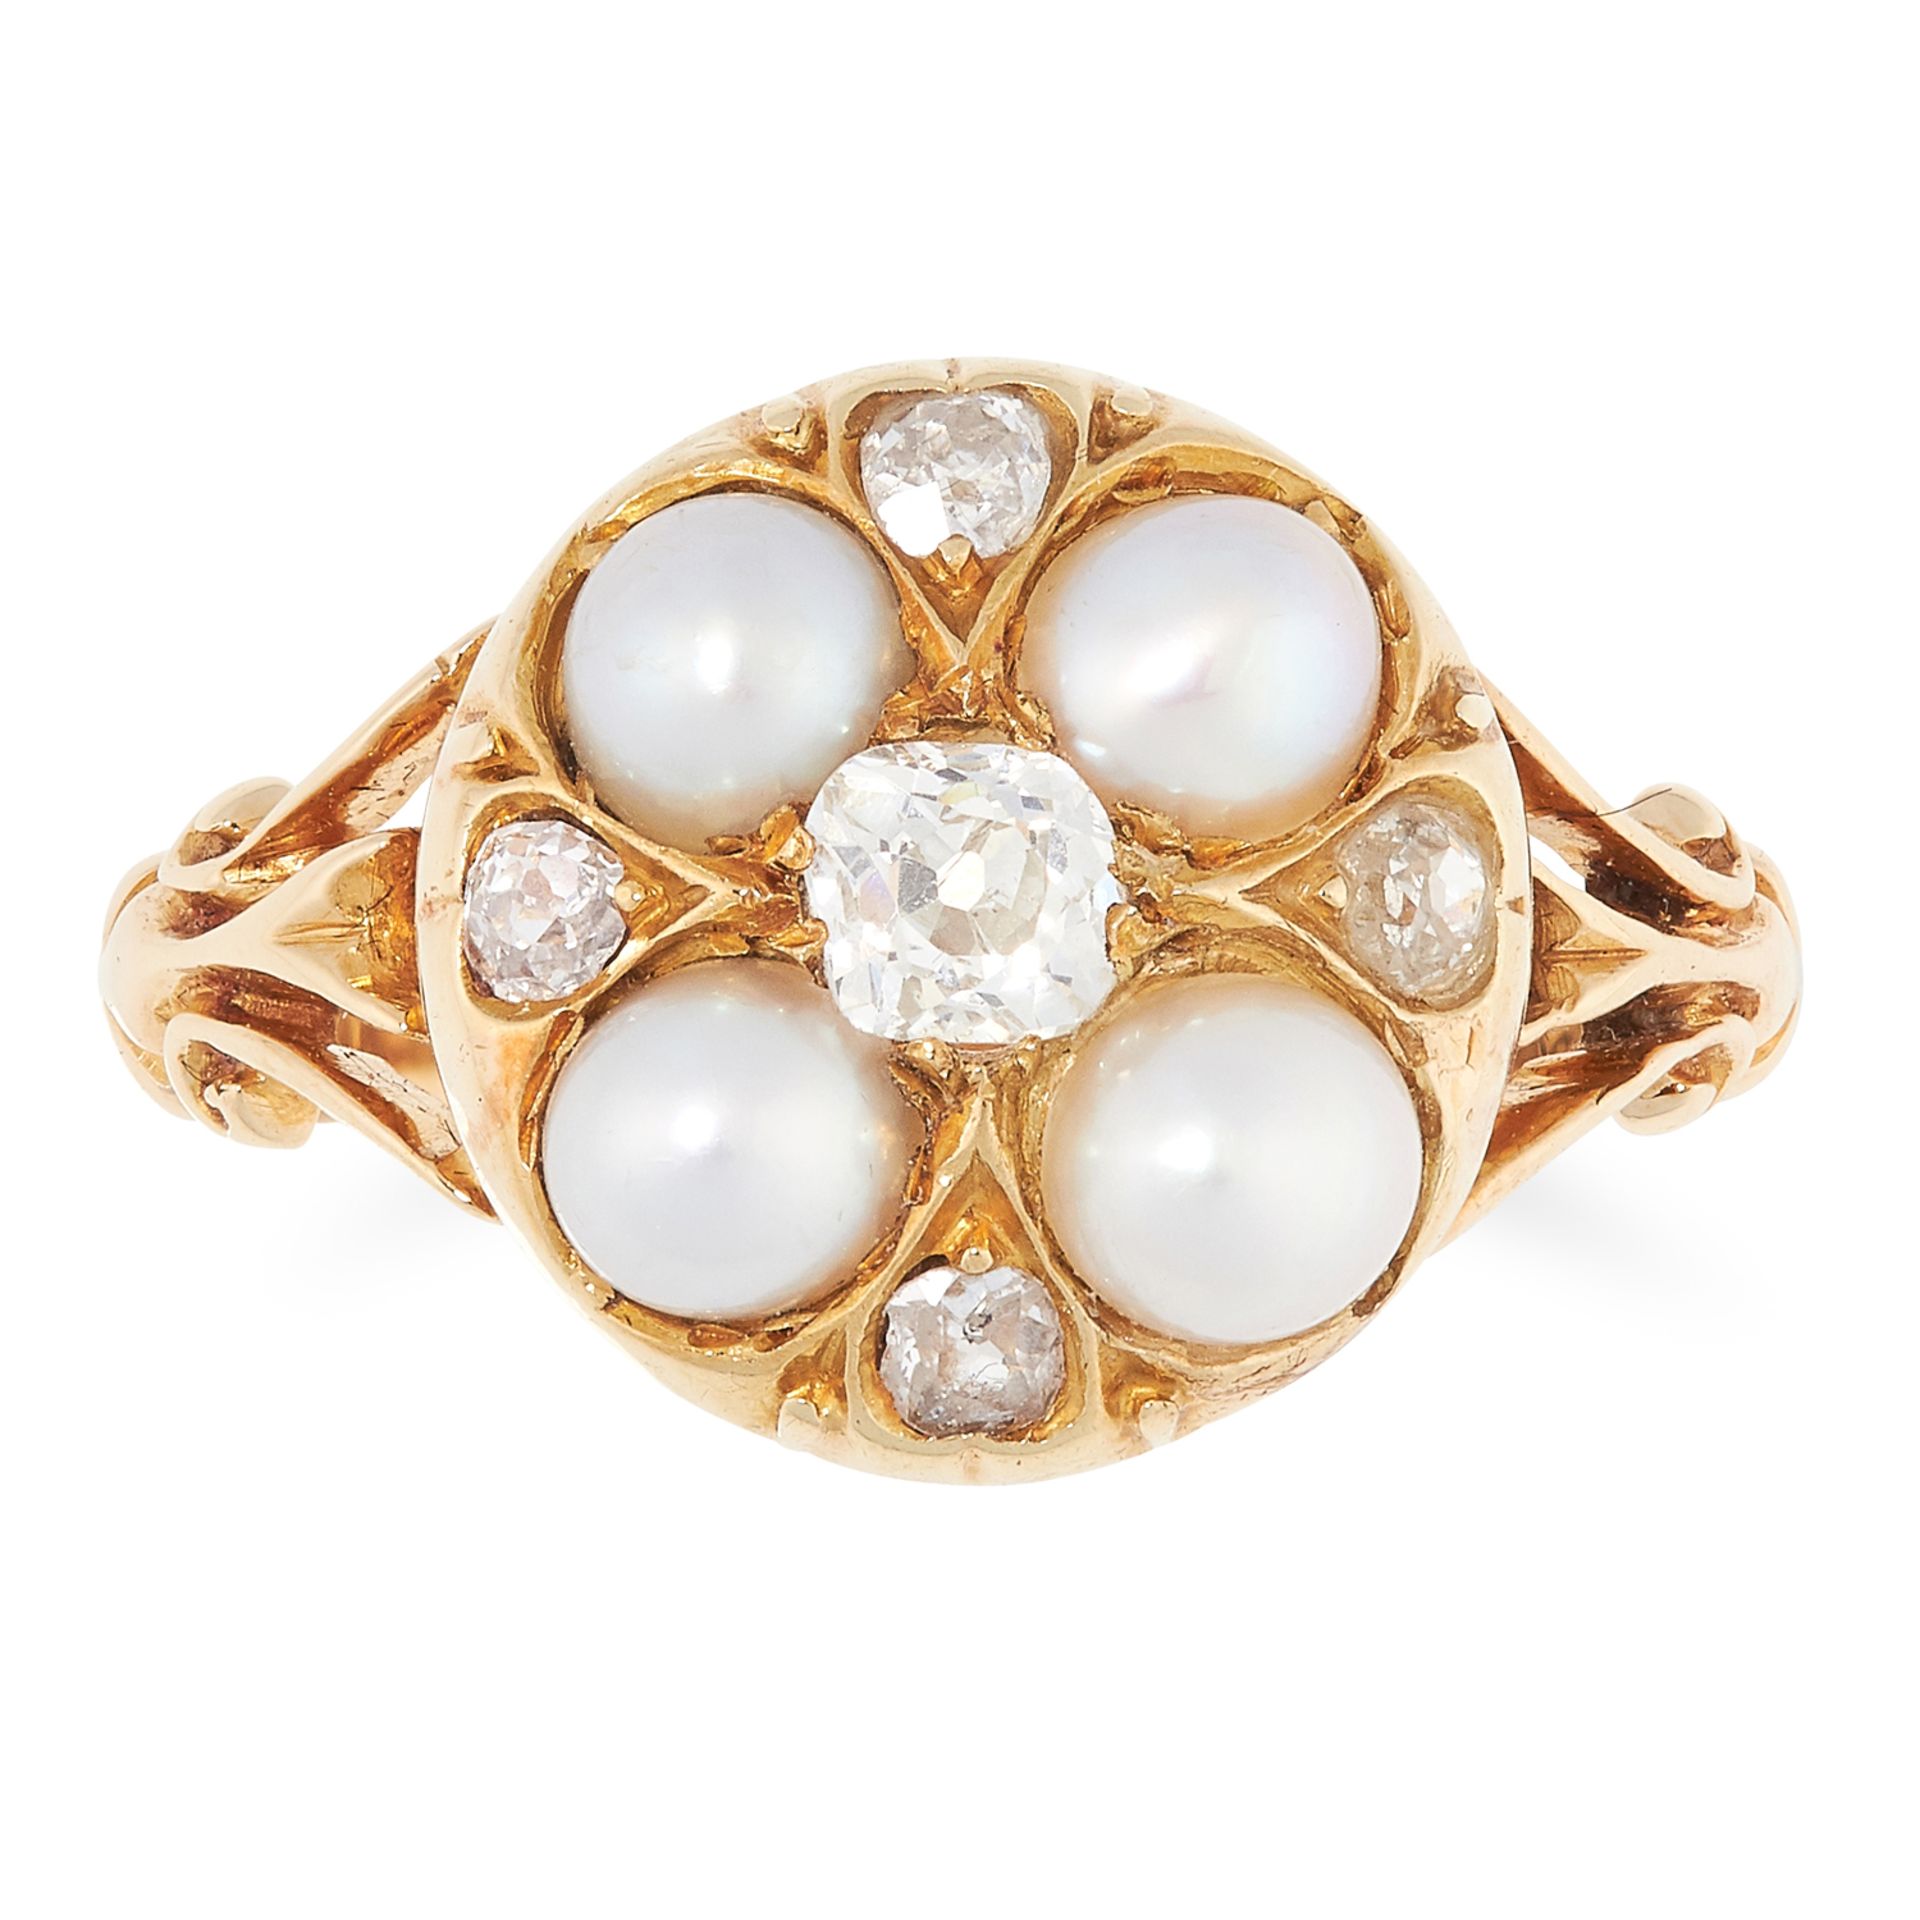 AN ANTIQUE PEARL AND DIAMOND CLUSTER RING set with old cut diamonds and four pearls, size O / 7, 5.